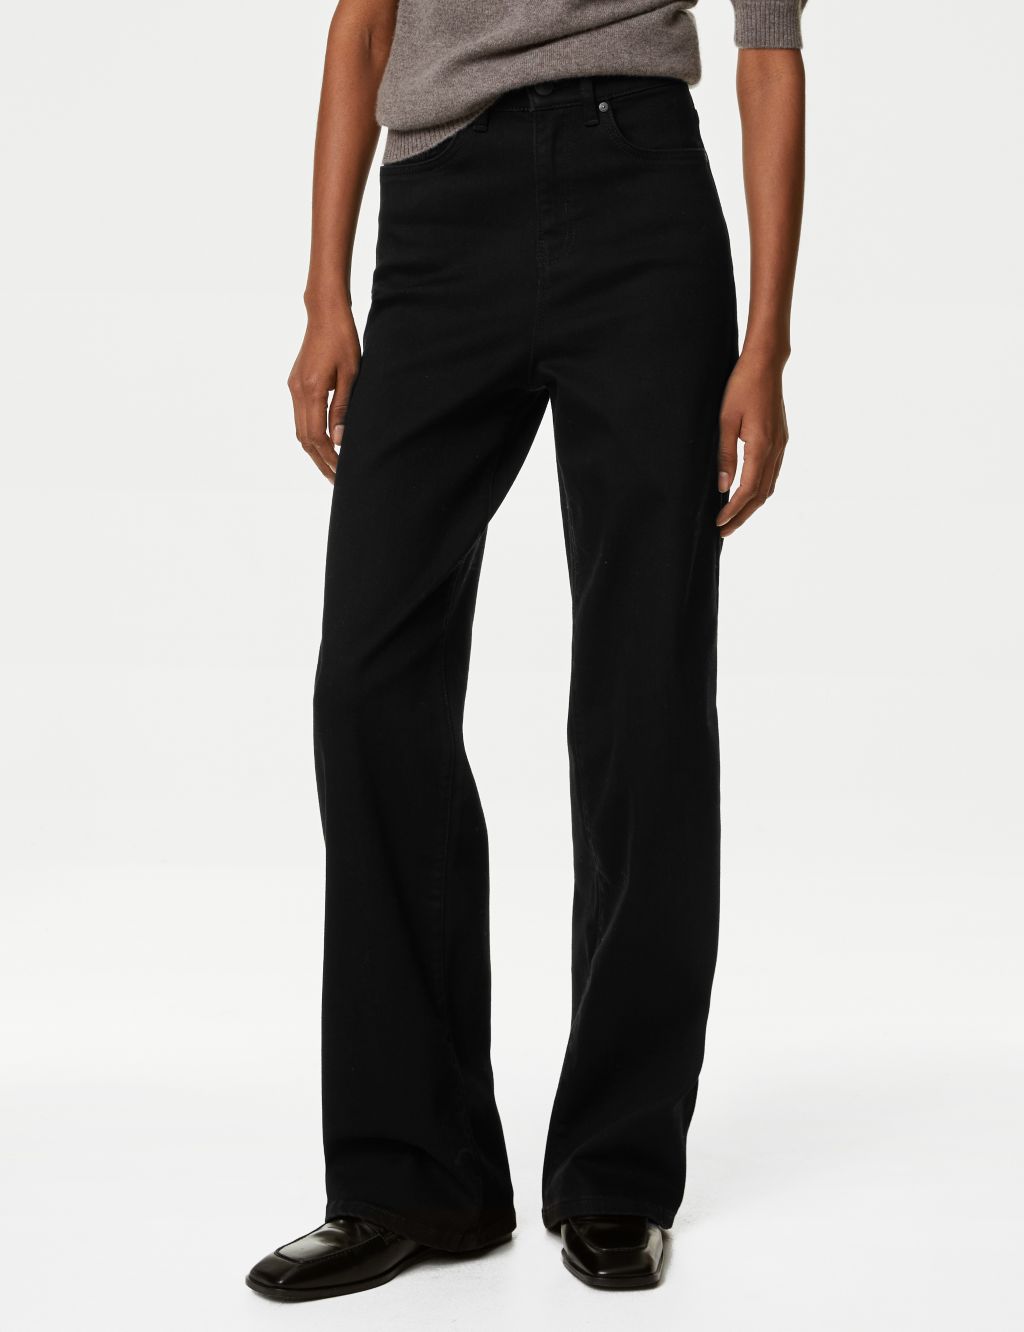 Lyocell™ Blend High Waisted Wide Leg Jeans image 4